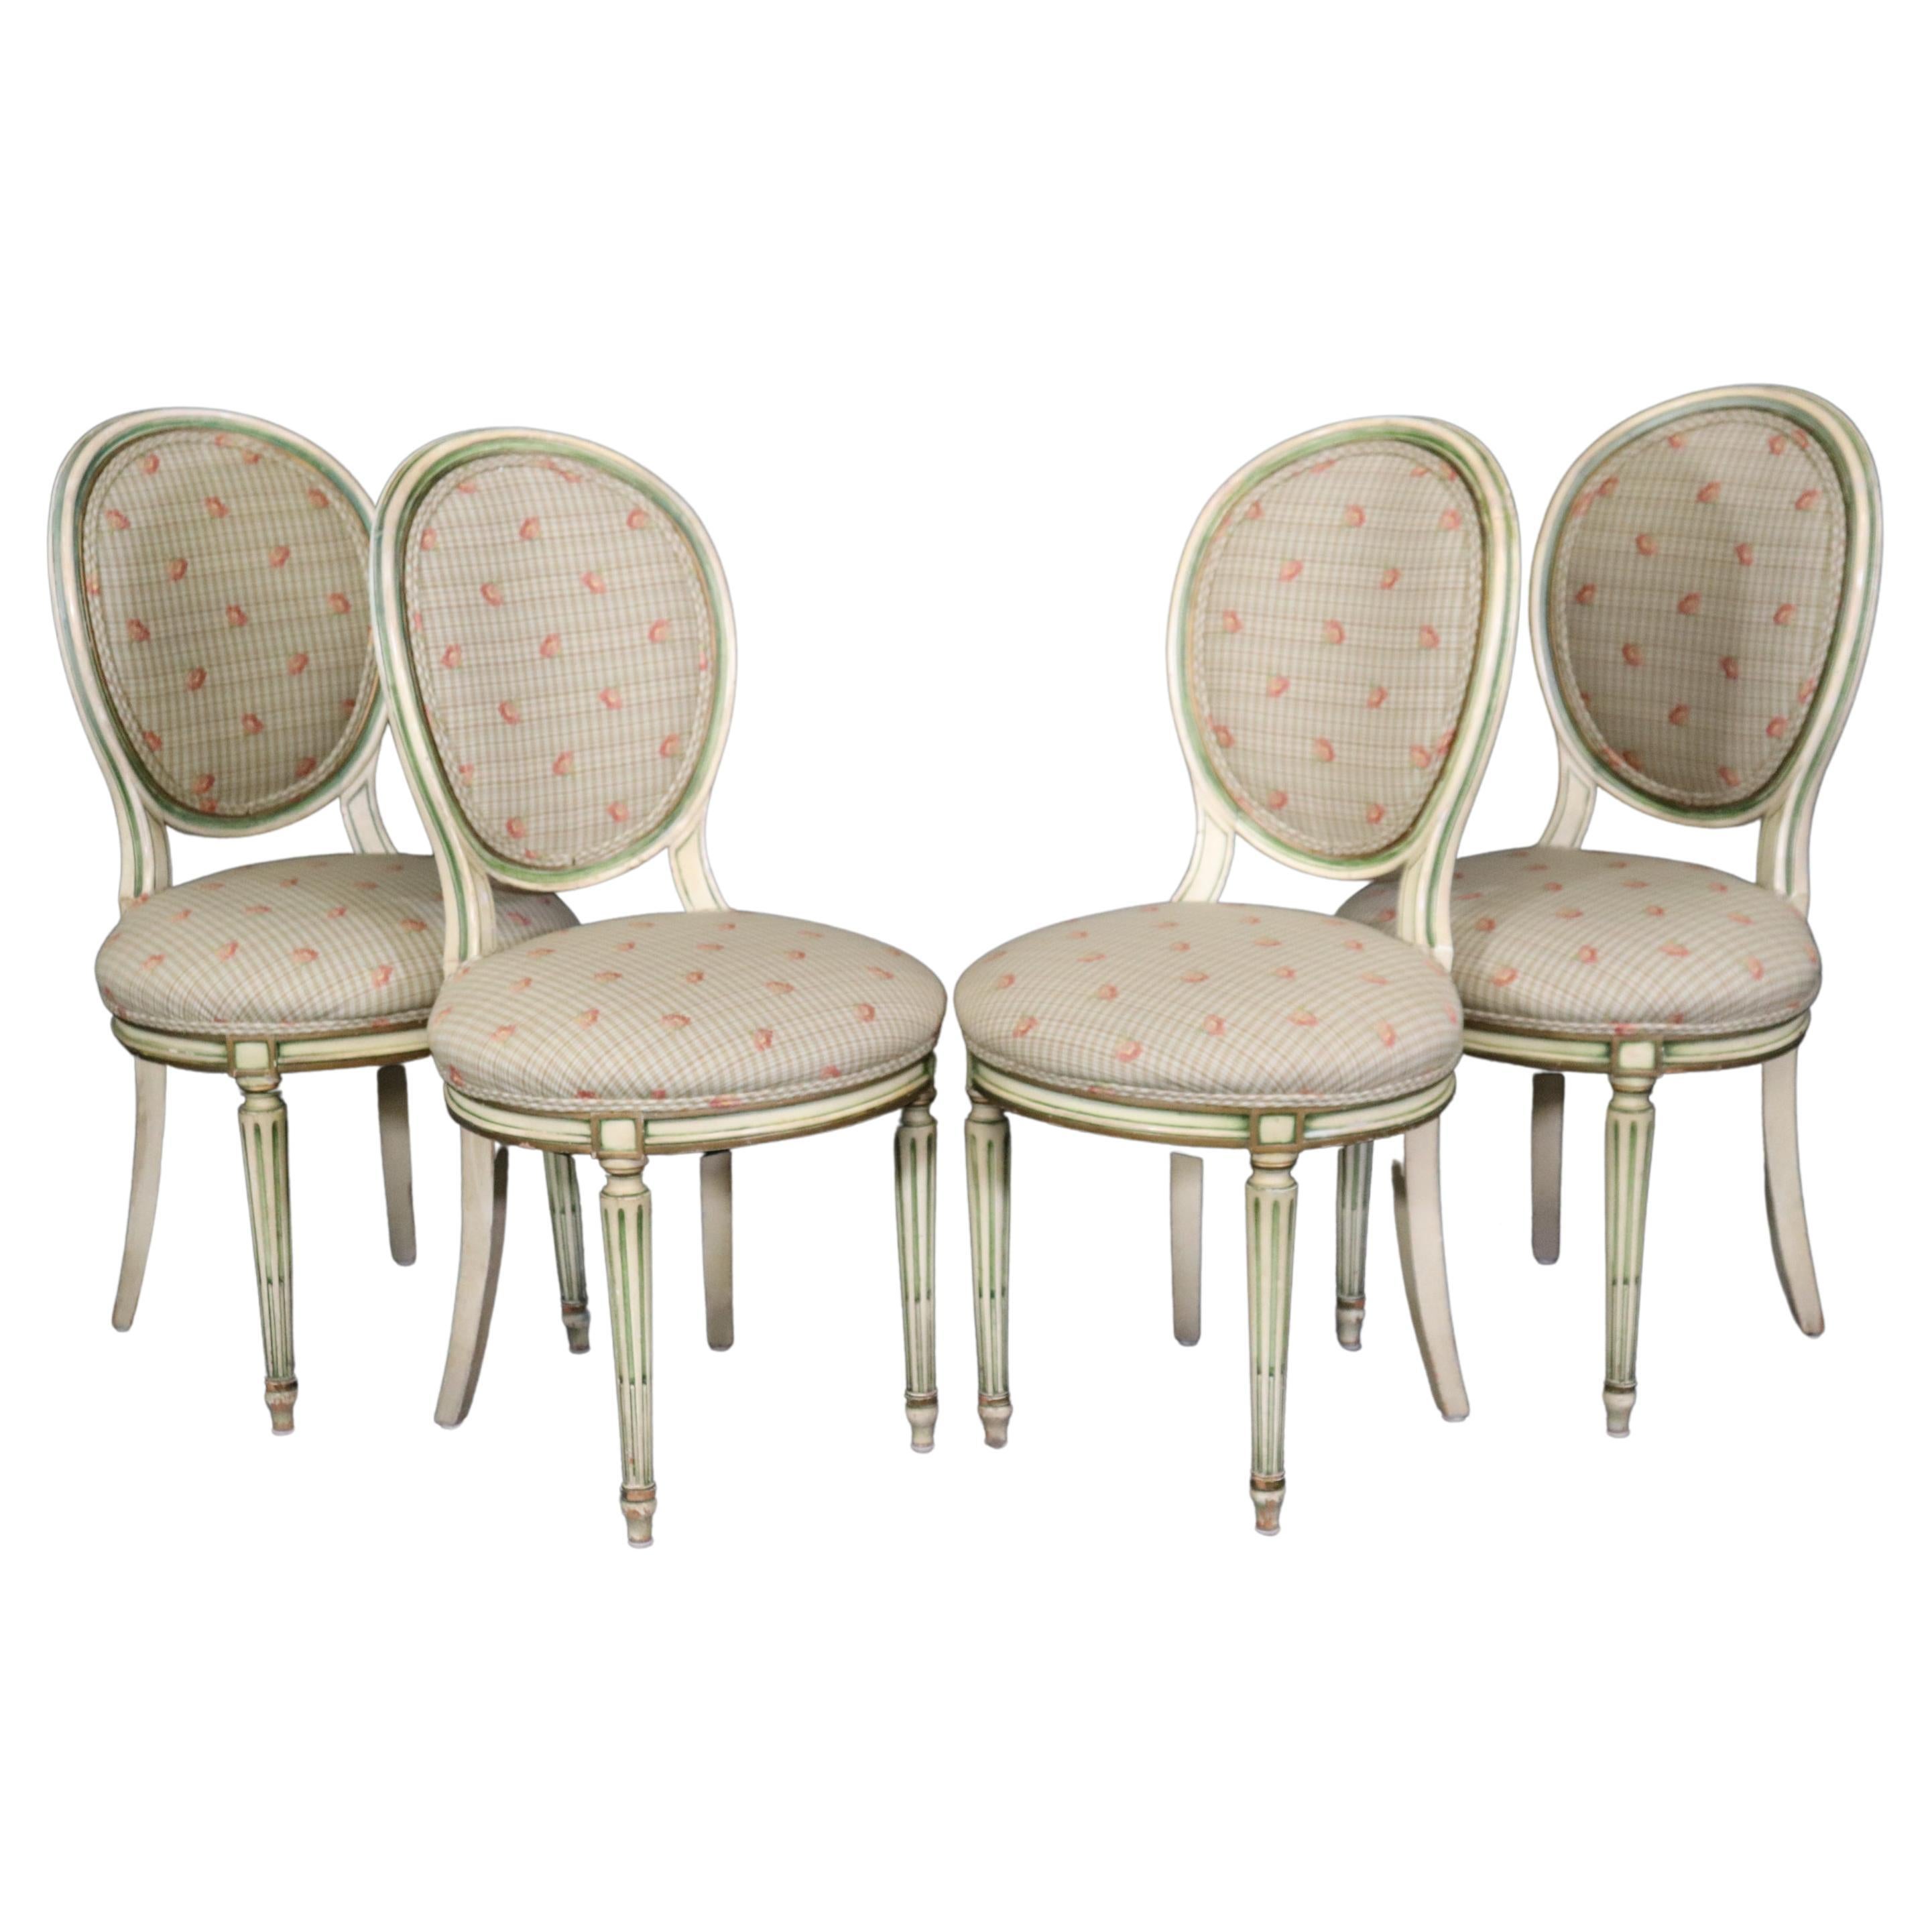 4 Vintage Louis XVI Directoire French Style Dining Chairs With Floral Upholstery